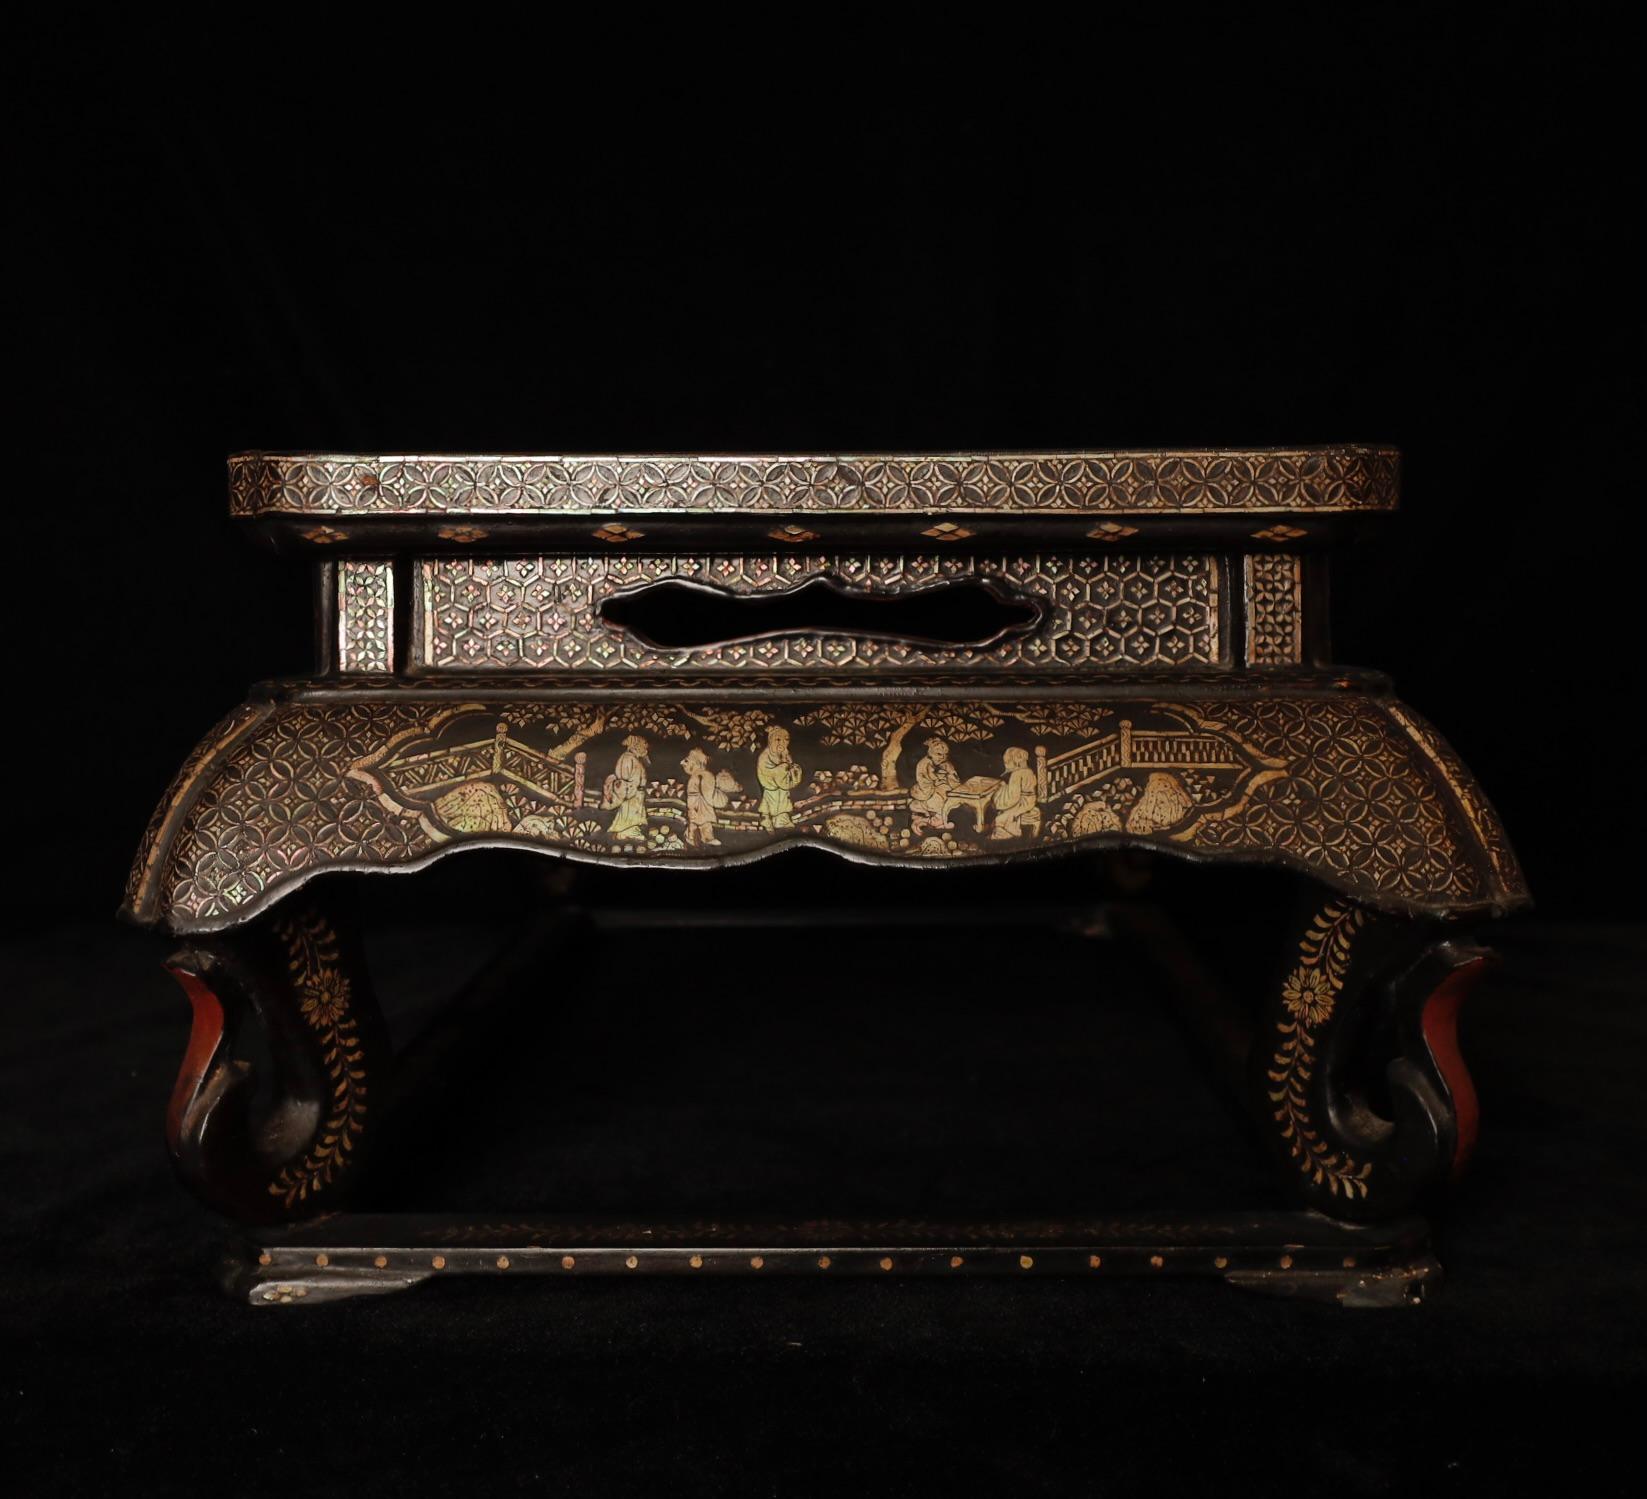 Ming Dynasty Period Scholar's Garden: Mother-of-Pearl Inlaid Lacquer Kang Table For Sale 7